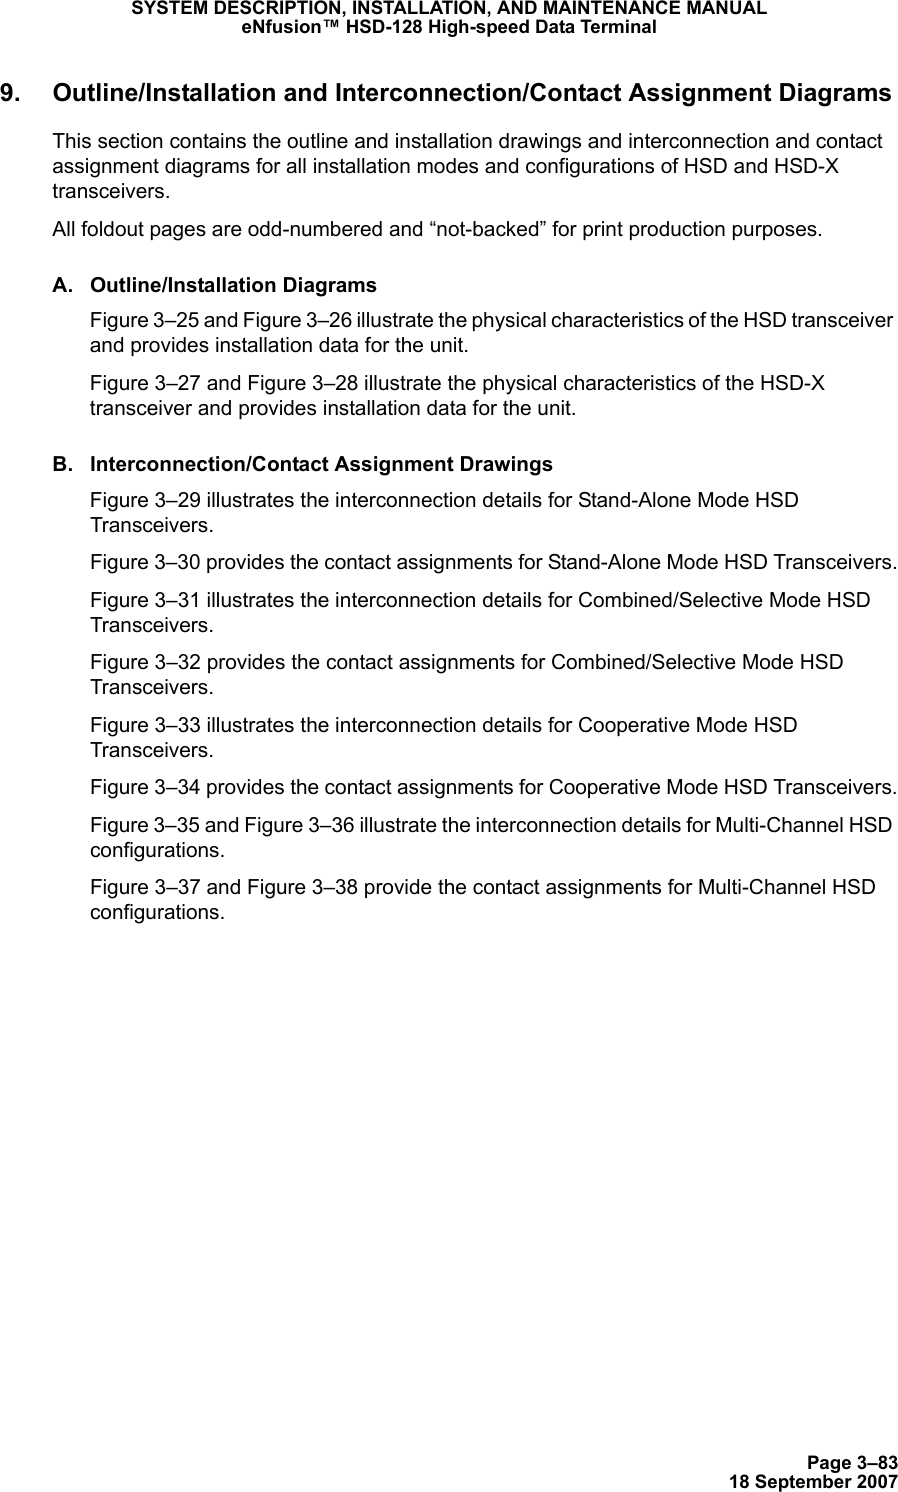 Page 3–8318 September 2007SYSTEM DESCRIPTION, INSTALLATION, AND MAINTENANCE MANUALeNfusion™ HSD-128 High-speed Data Terminal9. Outline/Installation and Interconnection/Contact Assignment DiagramsThis section contains the outline and installation drawings and interconnection and contact assignment diagrams for all installation modes and configurations of HSD and HSD-X transceivers.All foldout pages are odd-numbered and “not-backed” for print production purposes. A. Outline/Installation DiagramsFigure 3–25 and Figure 3–26 illustrate the physical characteristics of the HSD transceiver and provides installation data for the unit. Figure 3–27 and Figure 3–28 illustrate the physical characteristics of the HSD-X transceiver and provides installation data for the unit.B. Interconnection/Contact Assignment DrawingsFigure 3–29 illustrates the interconnection details for Stand-Alone Mode HSD Transceivers.Figure 3–30 provides the contact assignments for Stand-Alone Mode HSD Transceivers.Figure 3–31 illustrates the interconnection details for Combined/Selective Mode HSD Transceivers.Figure 3–32 provides the contact assignments for Combined/Selective Mode HSD Transceivers.Figure 3–33 illustrates the interconnection details for Cooperative Mode HSD Transceivers.Figure 3–34 provides the contact assignments for Cooperative Mode HSD Transceivers.Figure 3–35 and Figure 3–36 illustrate the interconnection details for Multi-Channel HSD configurations.Figure 3–37 and Figure 3–38 provide the contact assignments for Multi-Channel HSD configurations.